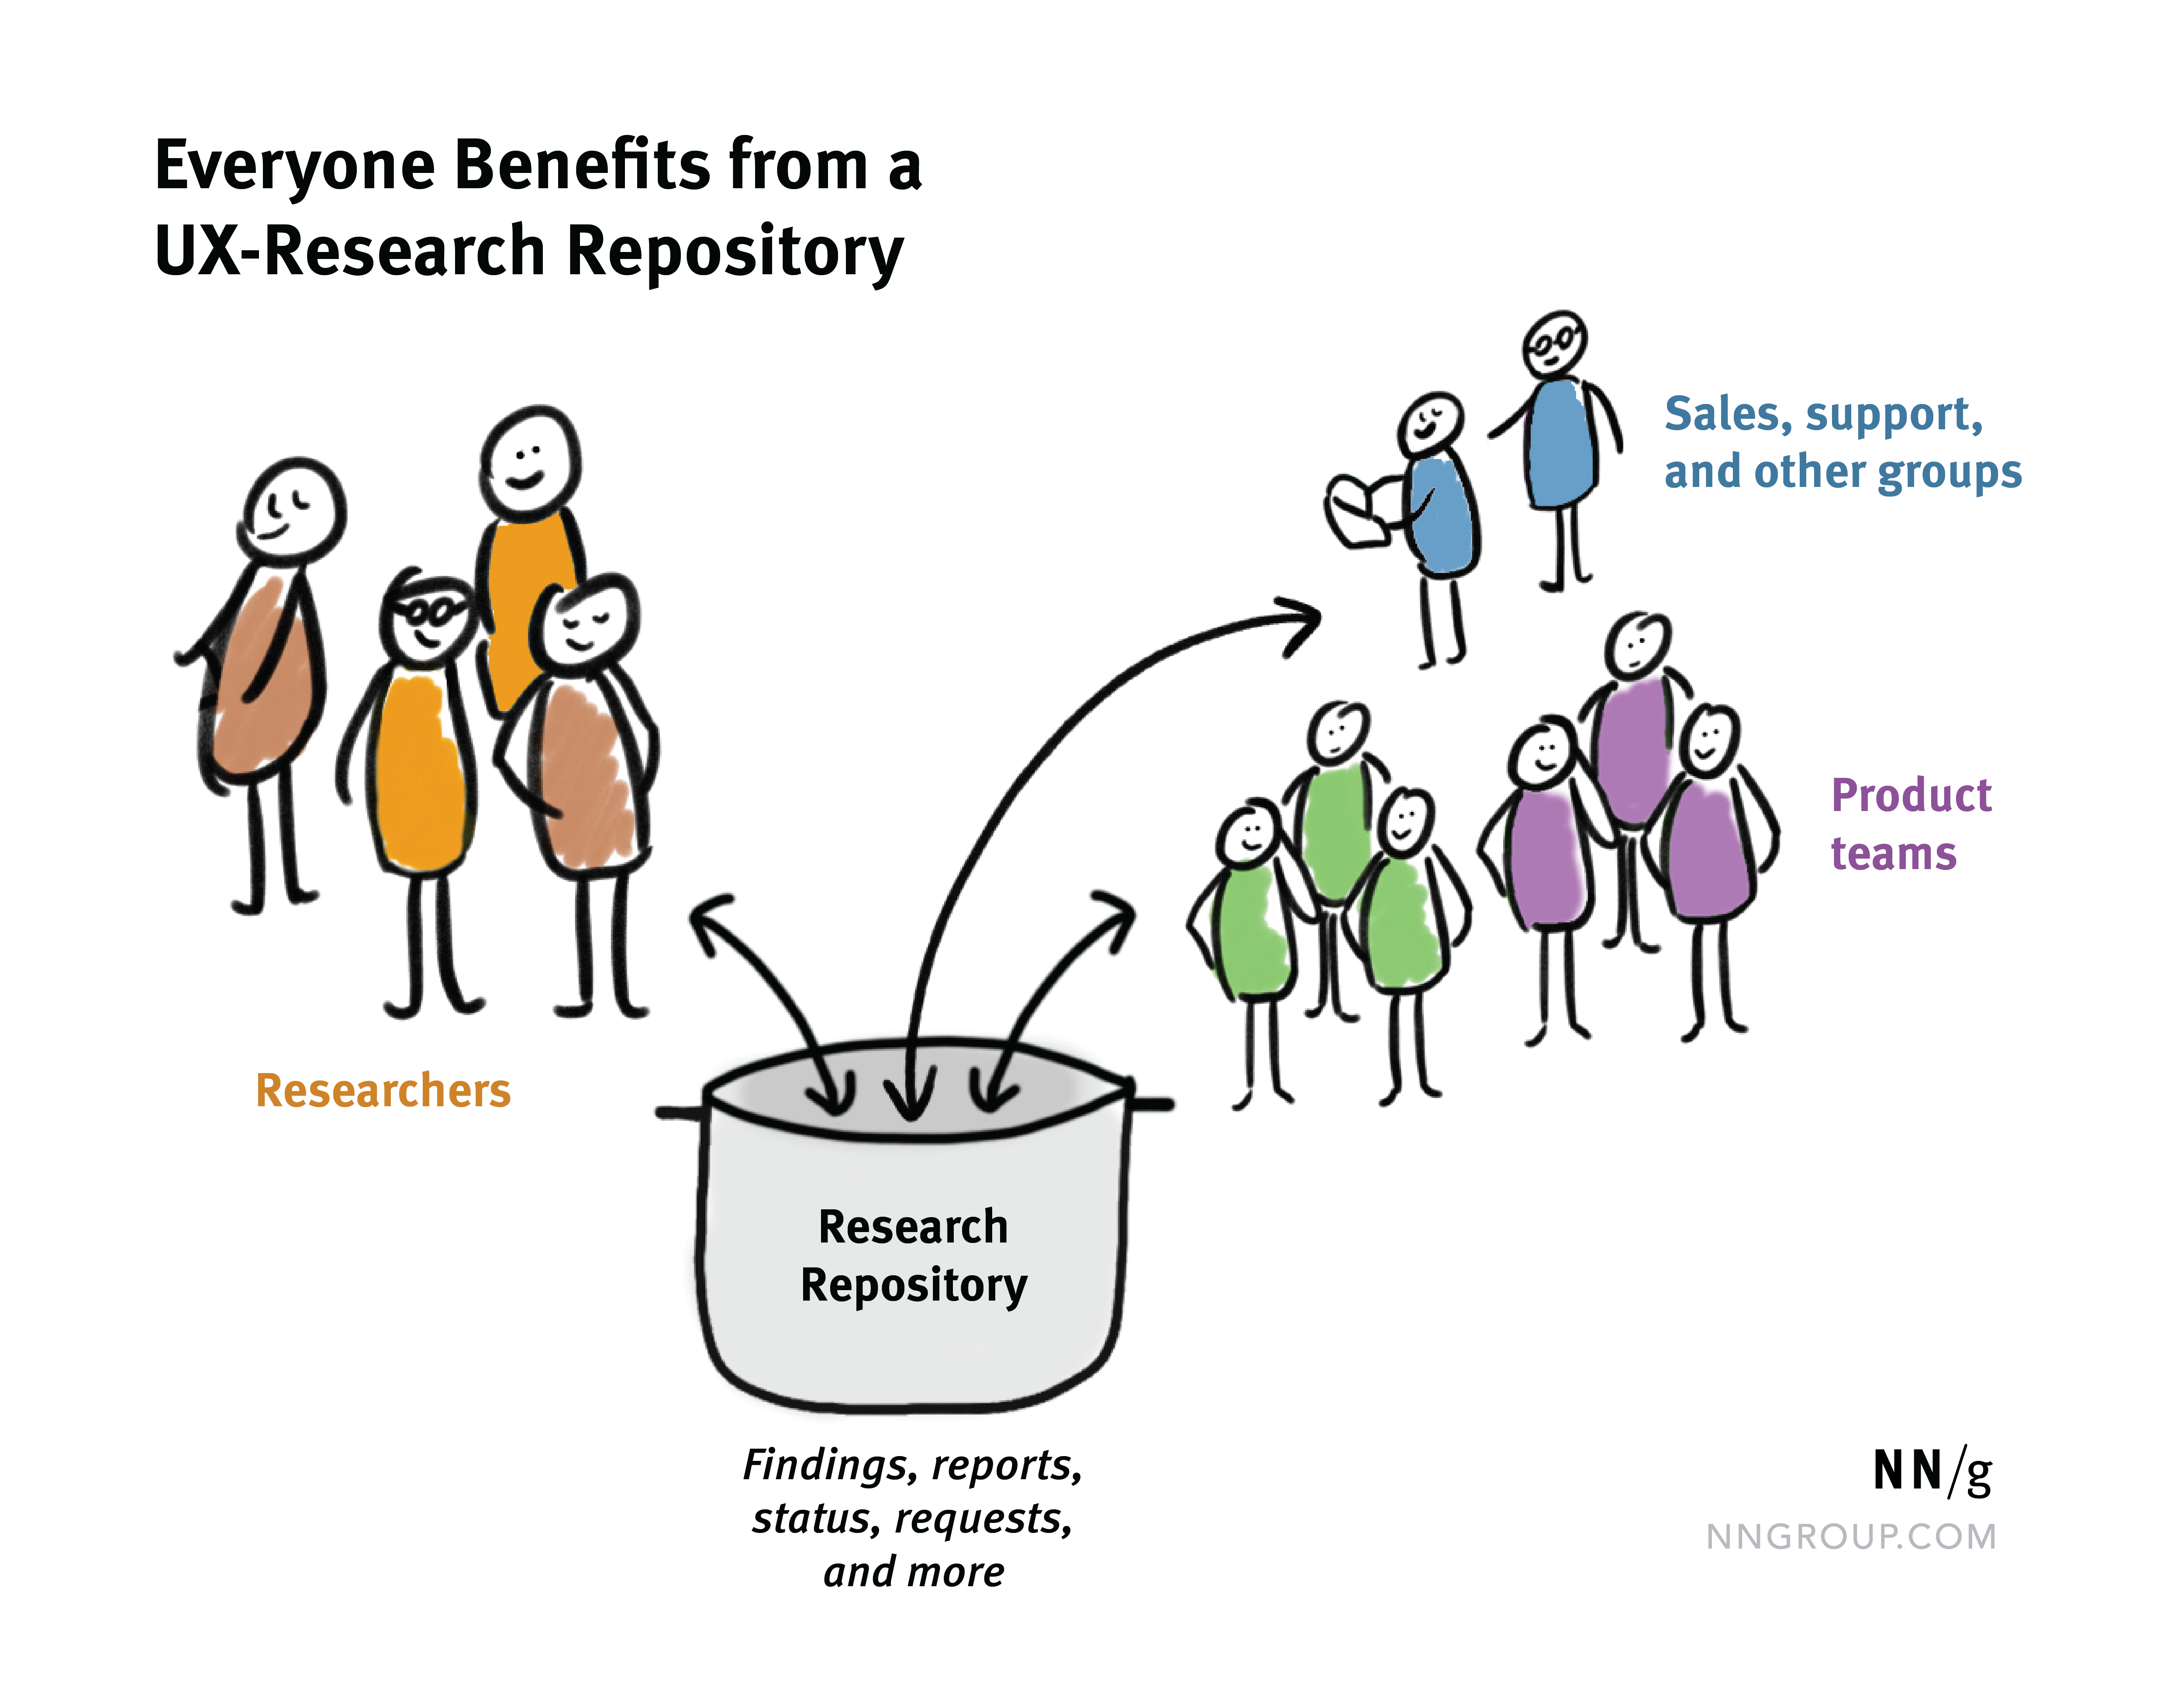 Everyone benefits from research repository software - NNGroup